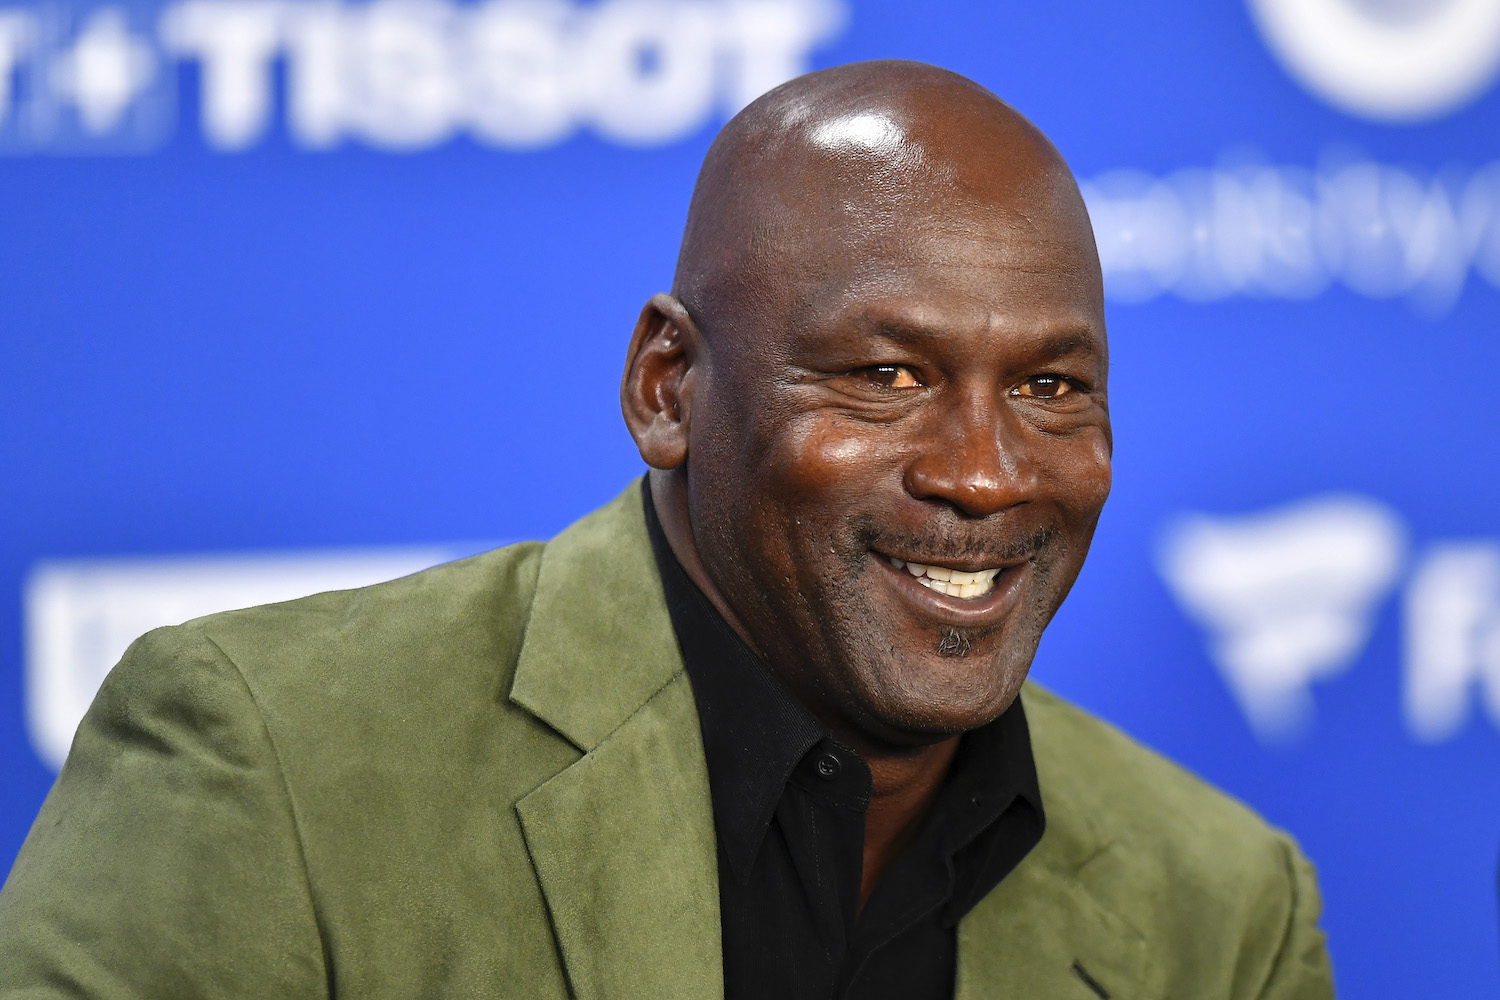 Michael Jordan is sports team owner who didn't make any political contribution